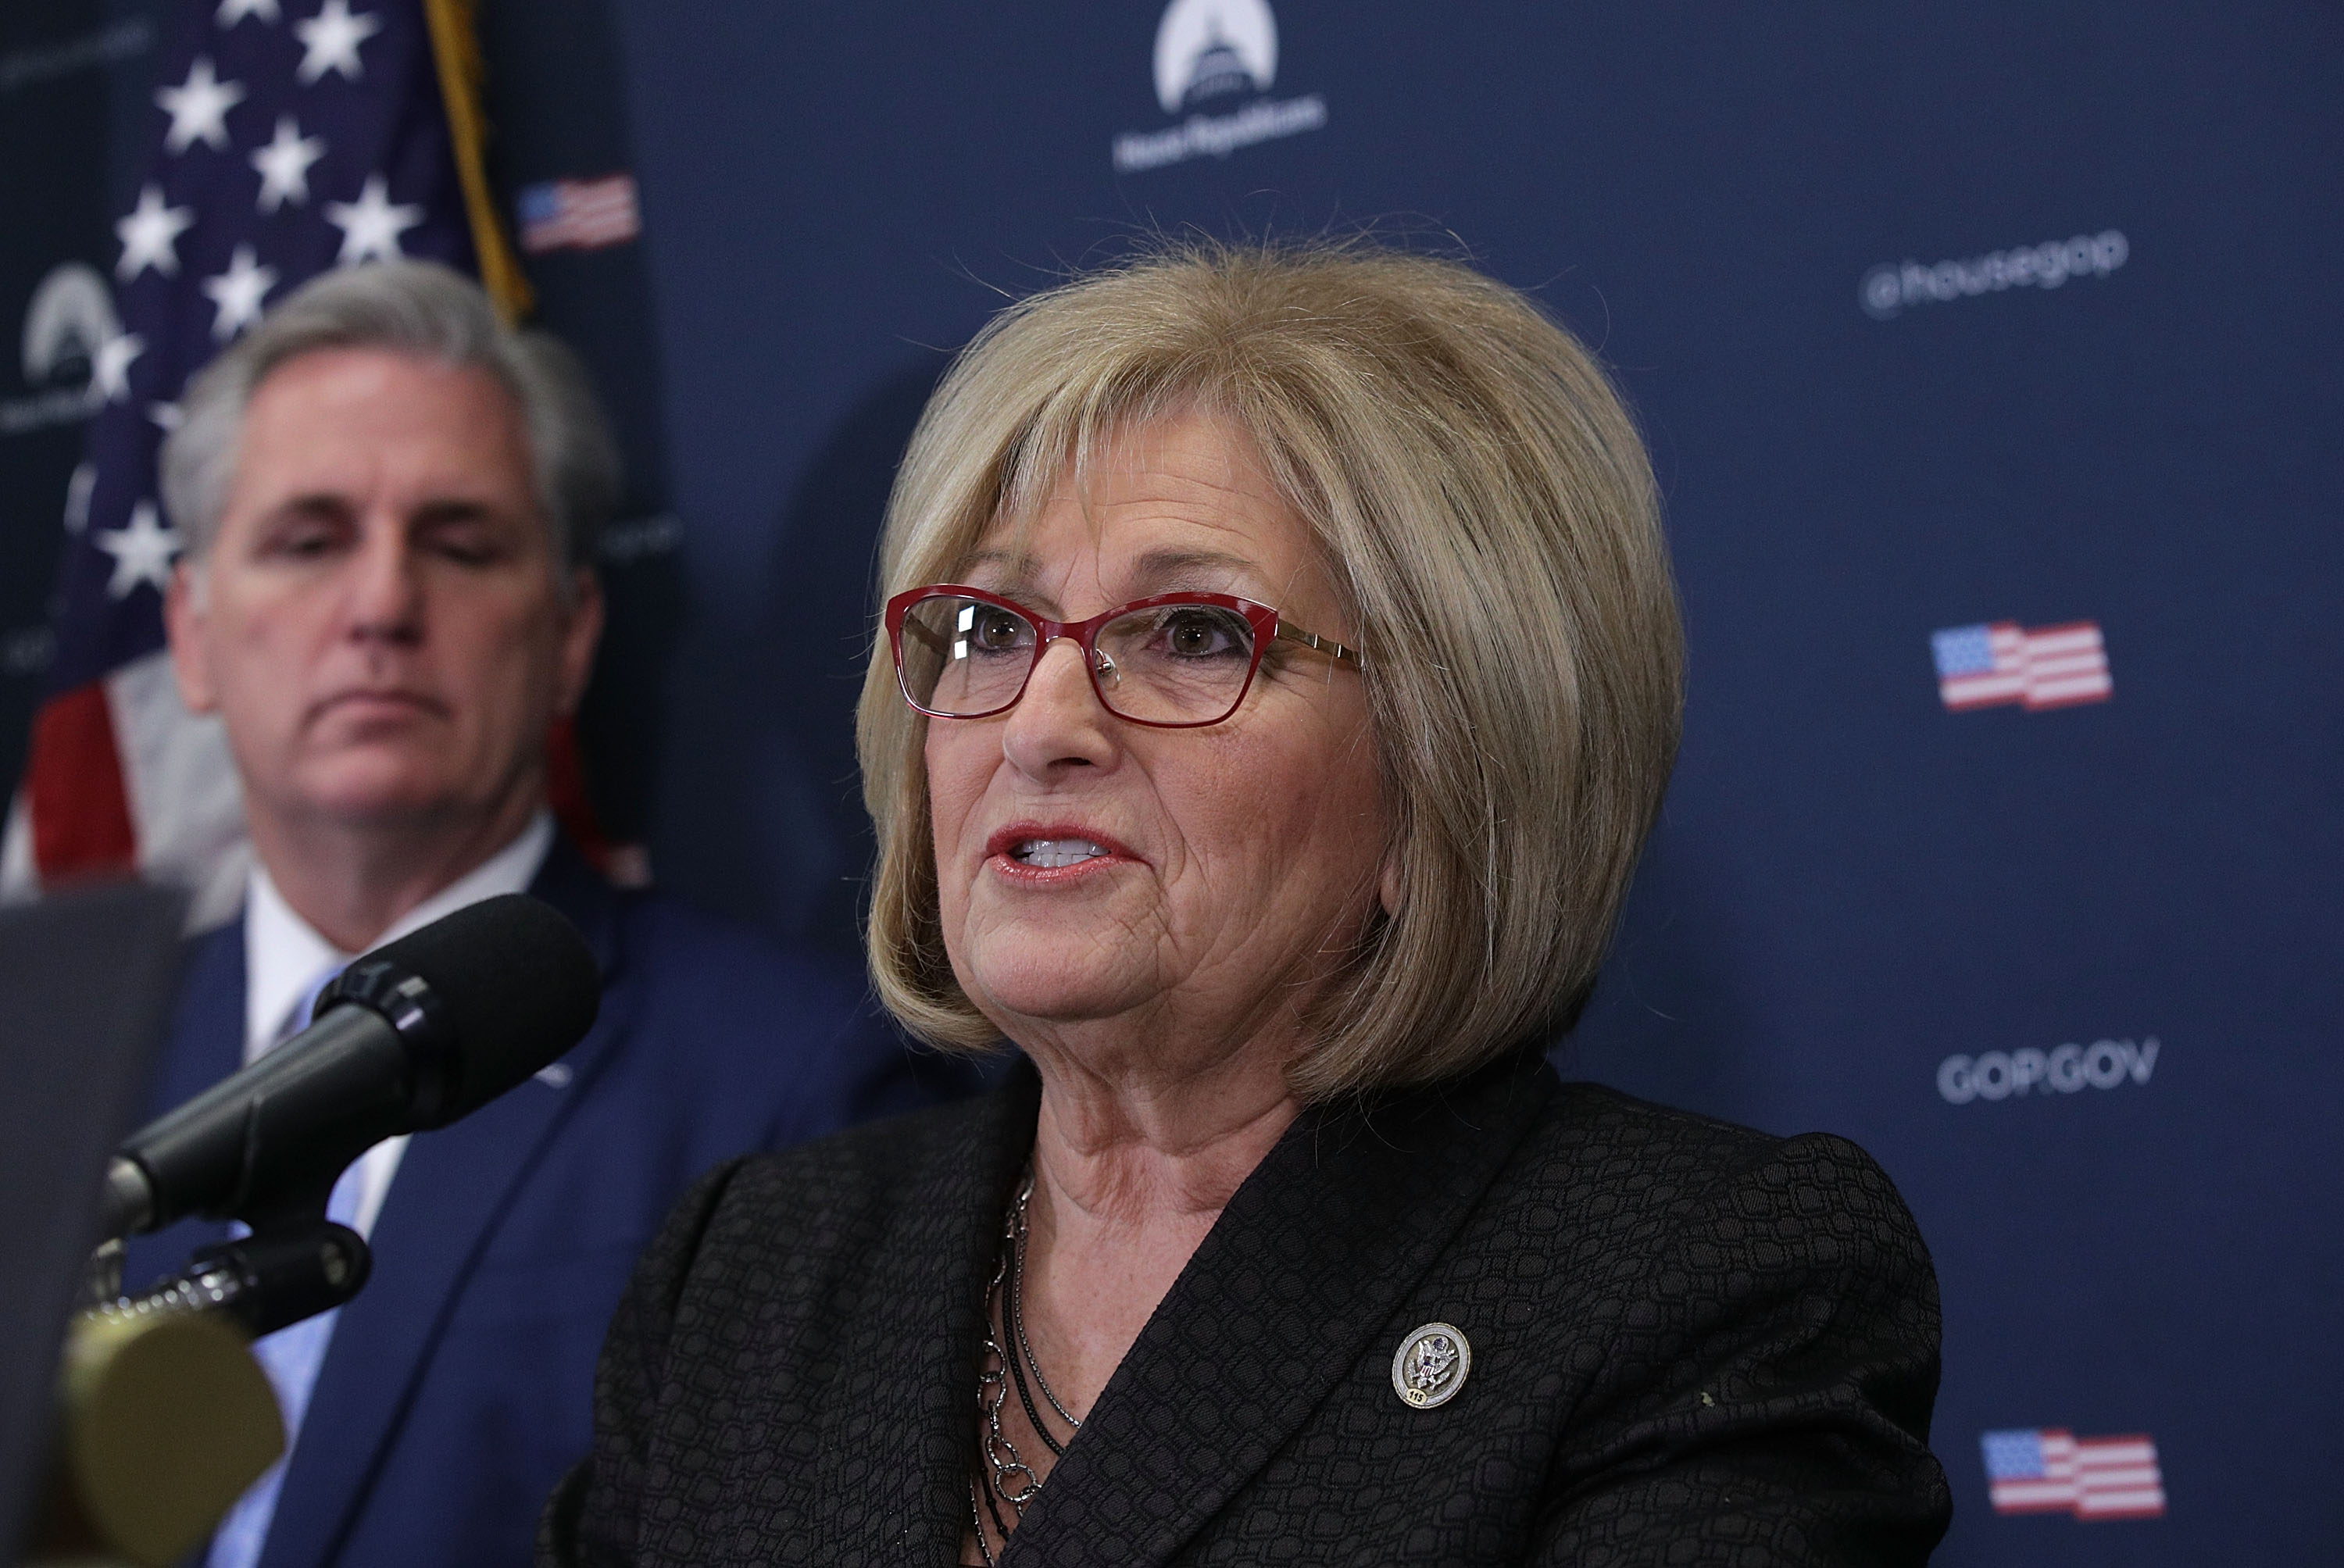 U.S. Rep. Diane Black speaks as House Majority Leader Rep. Kevin McCarthy listens during a news briefing after the weekly GOP Conference meeting January 10, 2017 at the Capitol in Washington, DC. (Photo by Alex Wong/Getty Images)